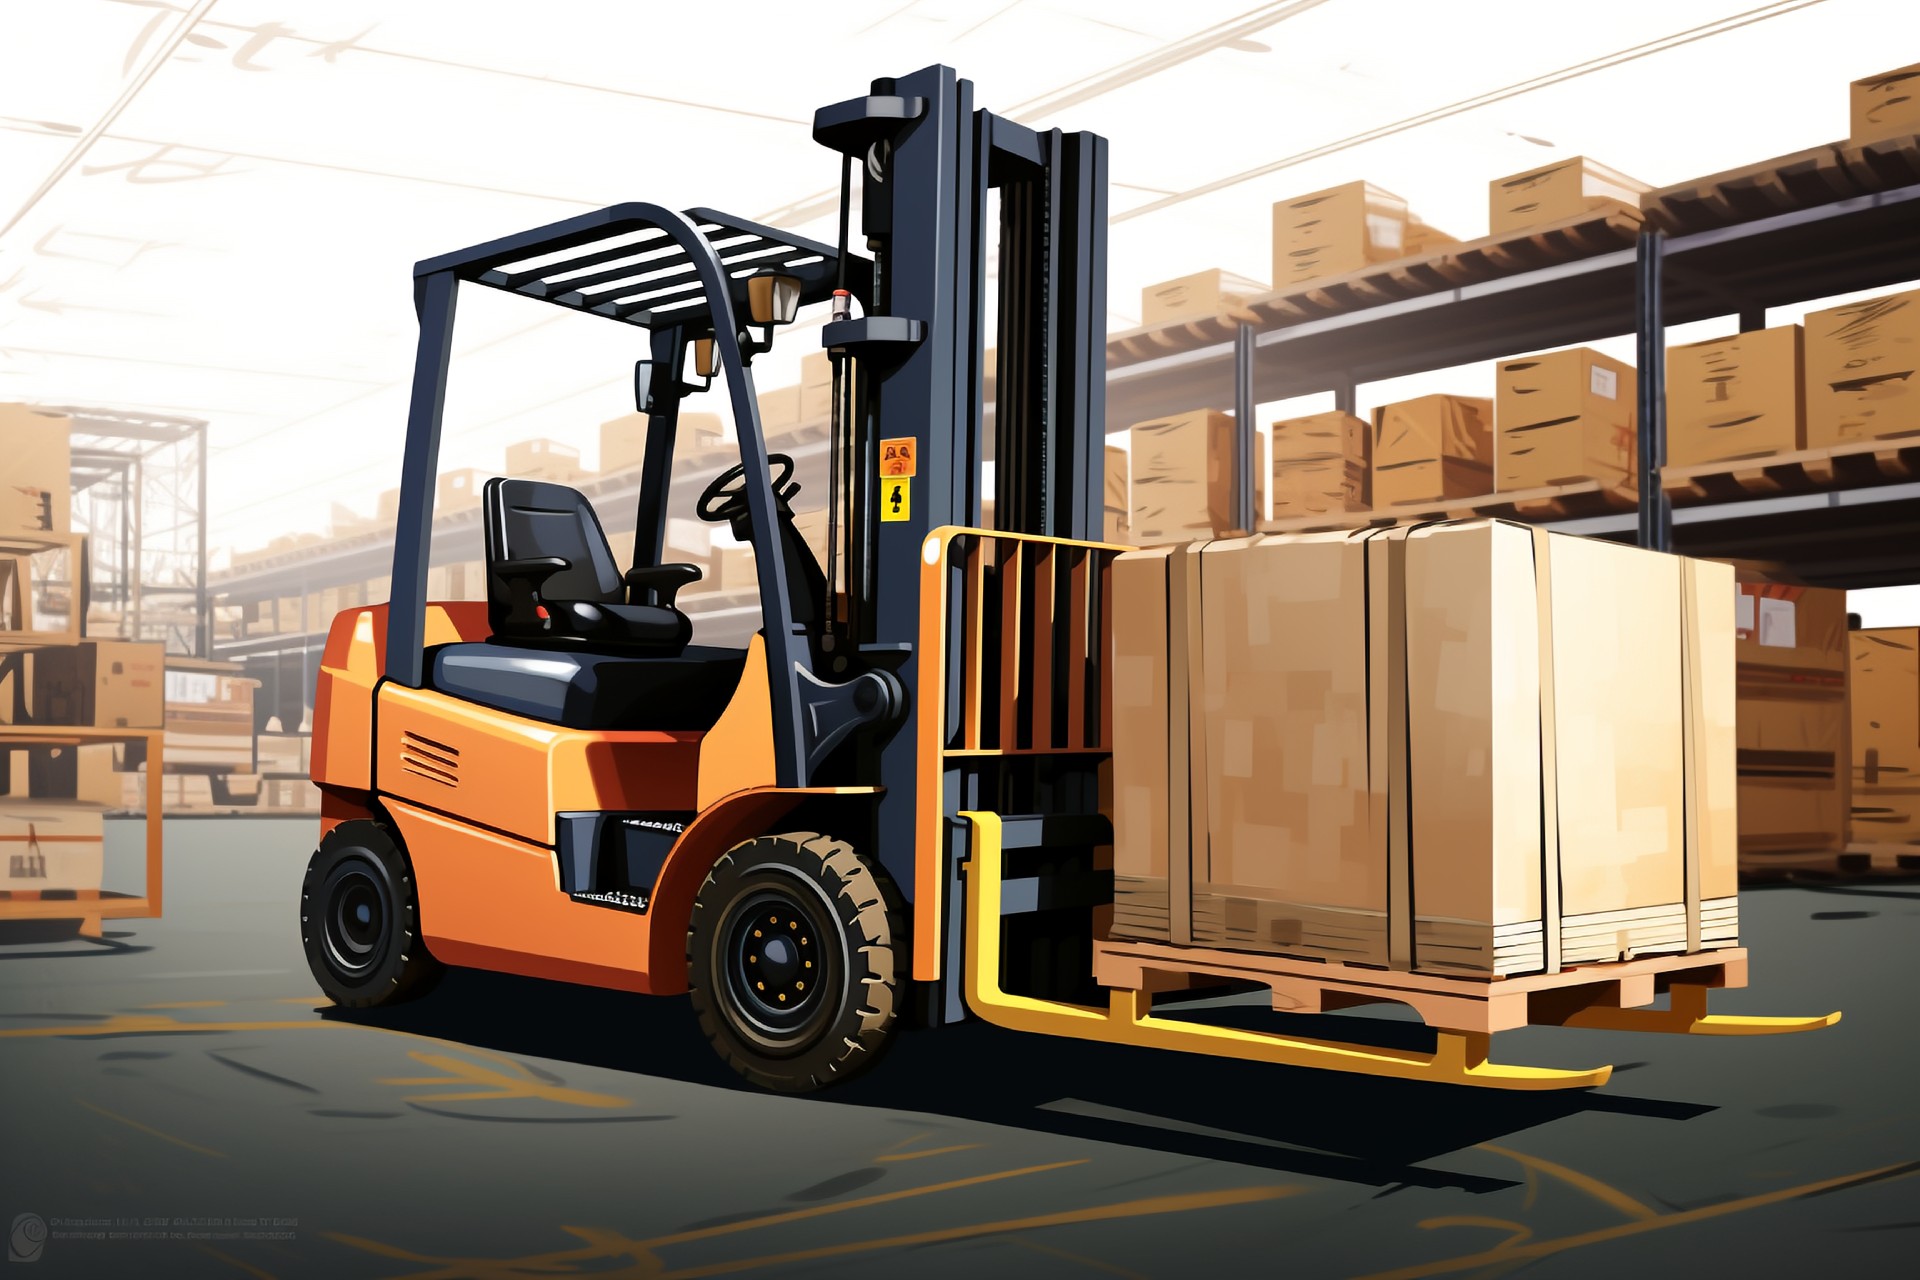 What is the Width Range of Forklifts Forks?